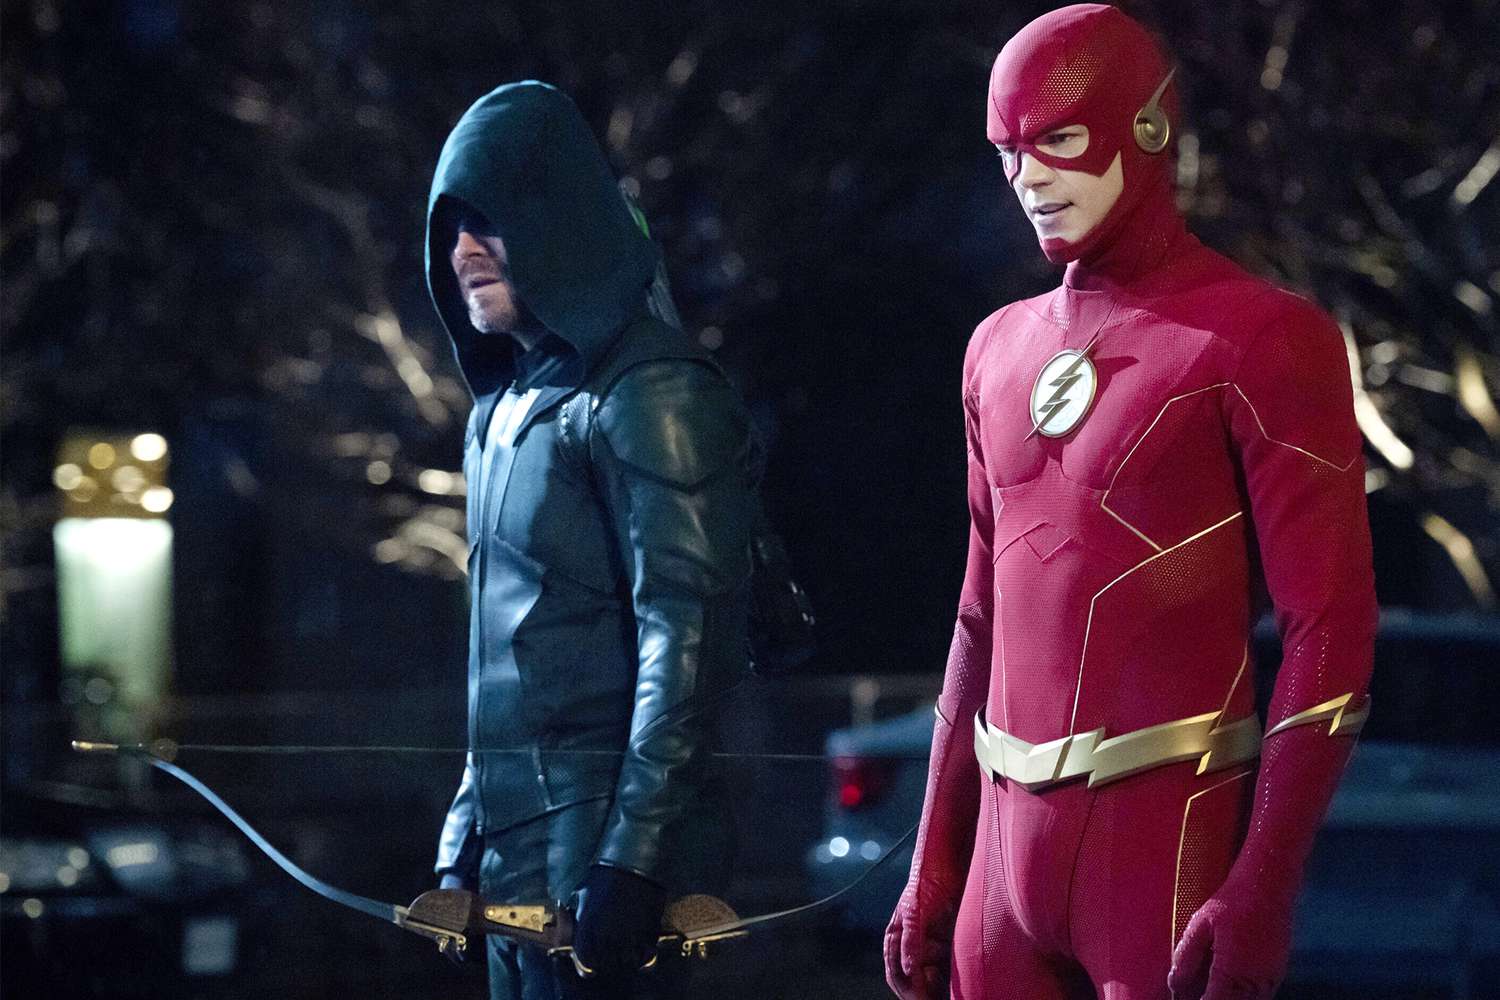 Stephen Amell as Green Arrow and Grant Gustin as the Flash